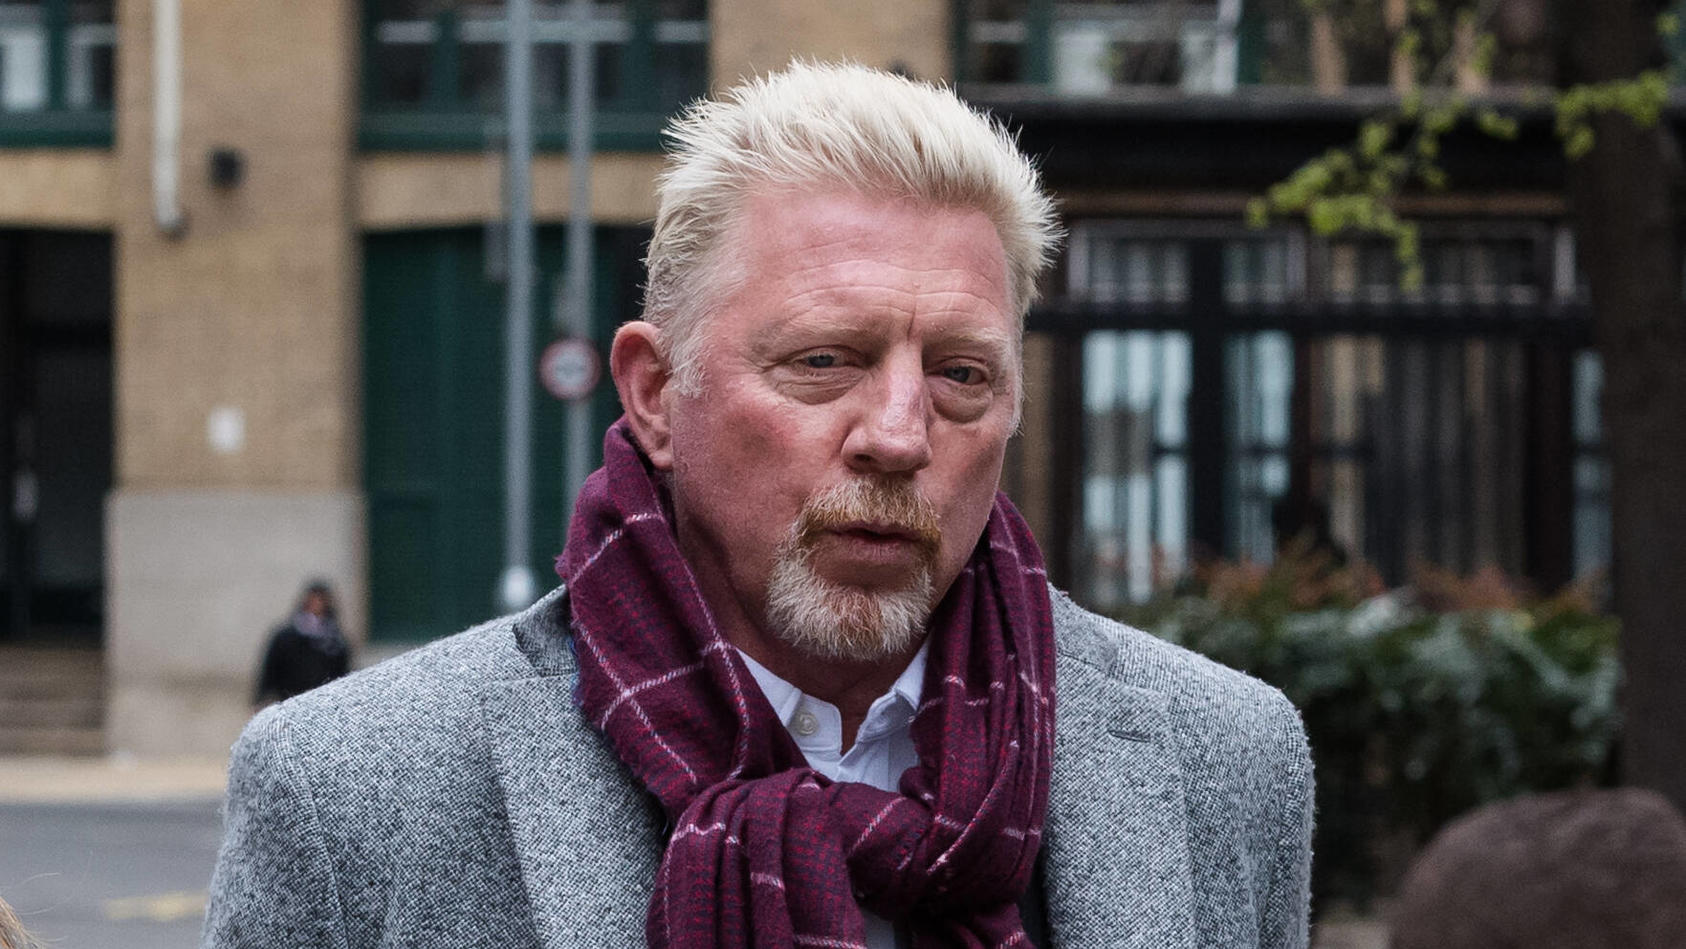  Boris Becker Court Case In London LONDON, UNITED KINGDOM - APRIL 08, 2022: Former tennis star Boris Becker arrives at the Southwark Crown Court as the jury is expected to continue to deliberate on the verdicts in his trial over allegedly concealing 